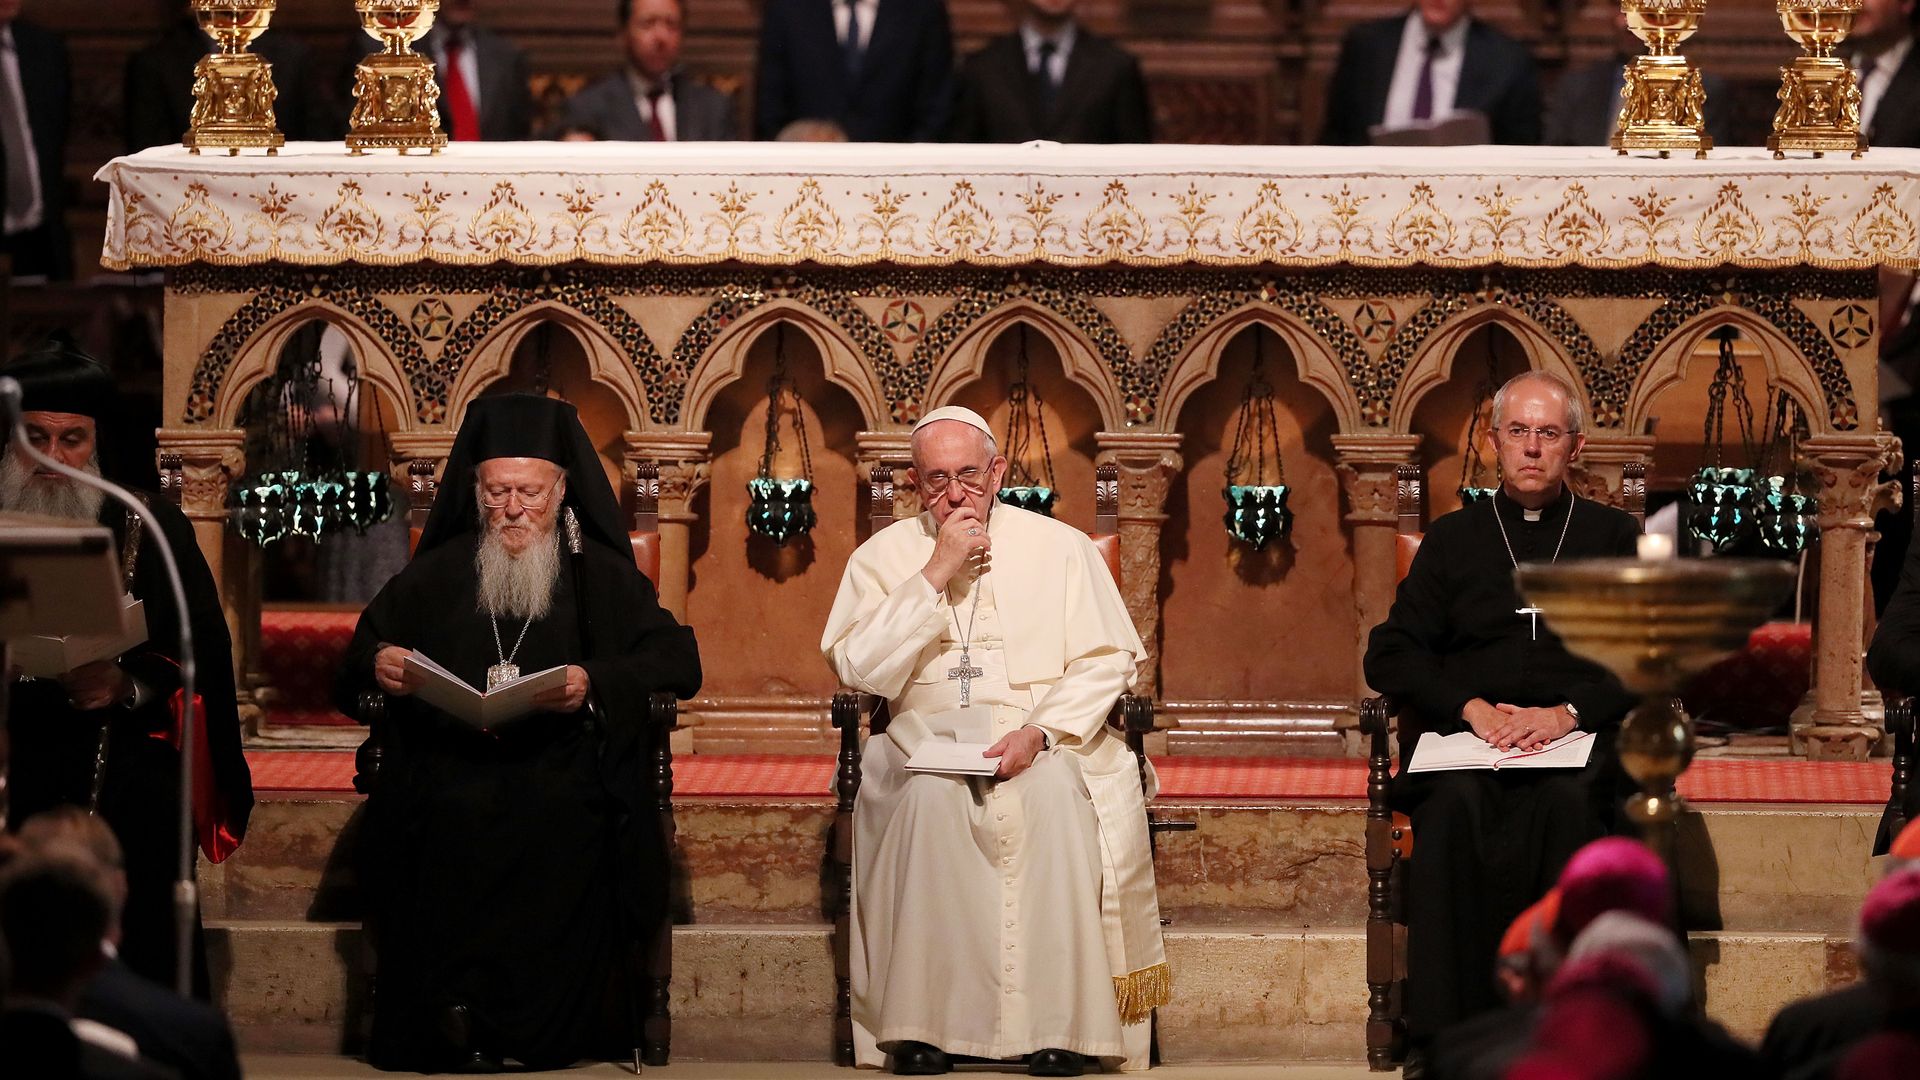 Ecumenical Patriarch Bartholomew, Pope Francis and Archbishop of Canterbury Justin Portal Welby seated in the Basilica of St. Francis in Assisi, Italy, in September 2016.